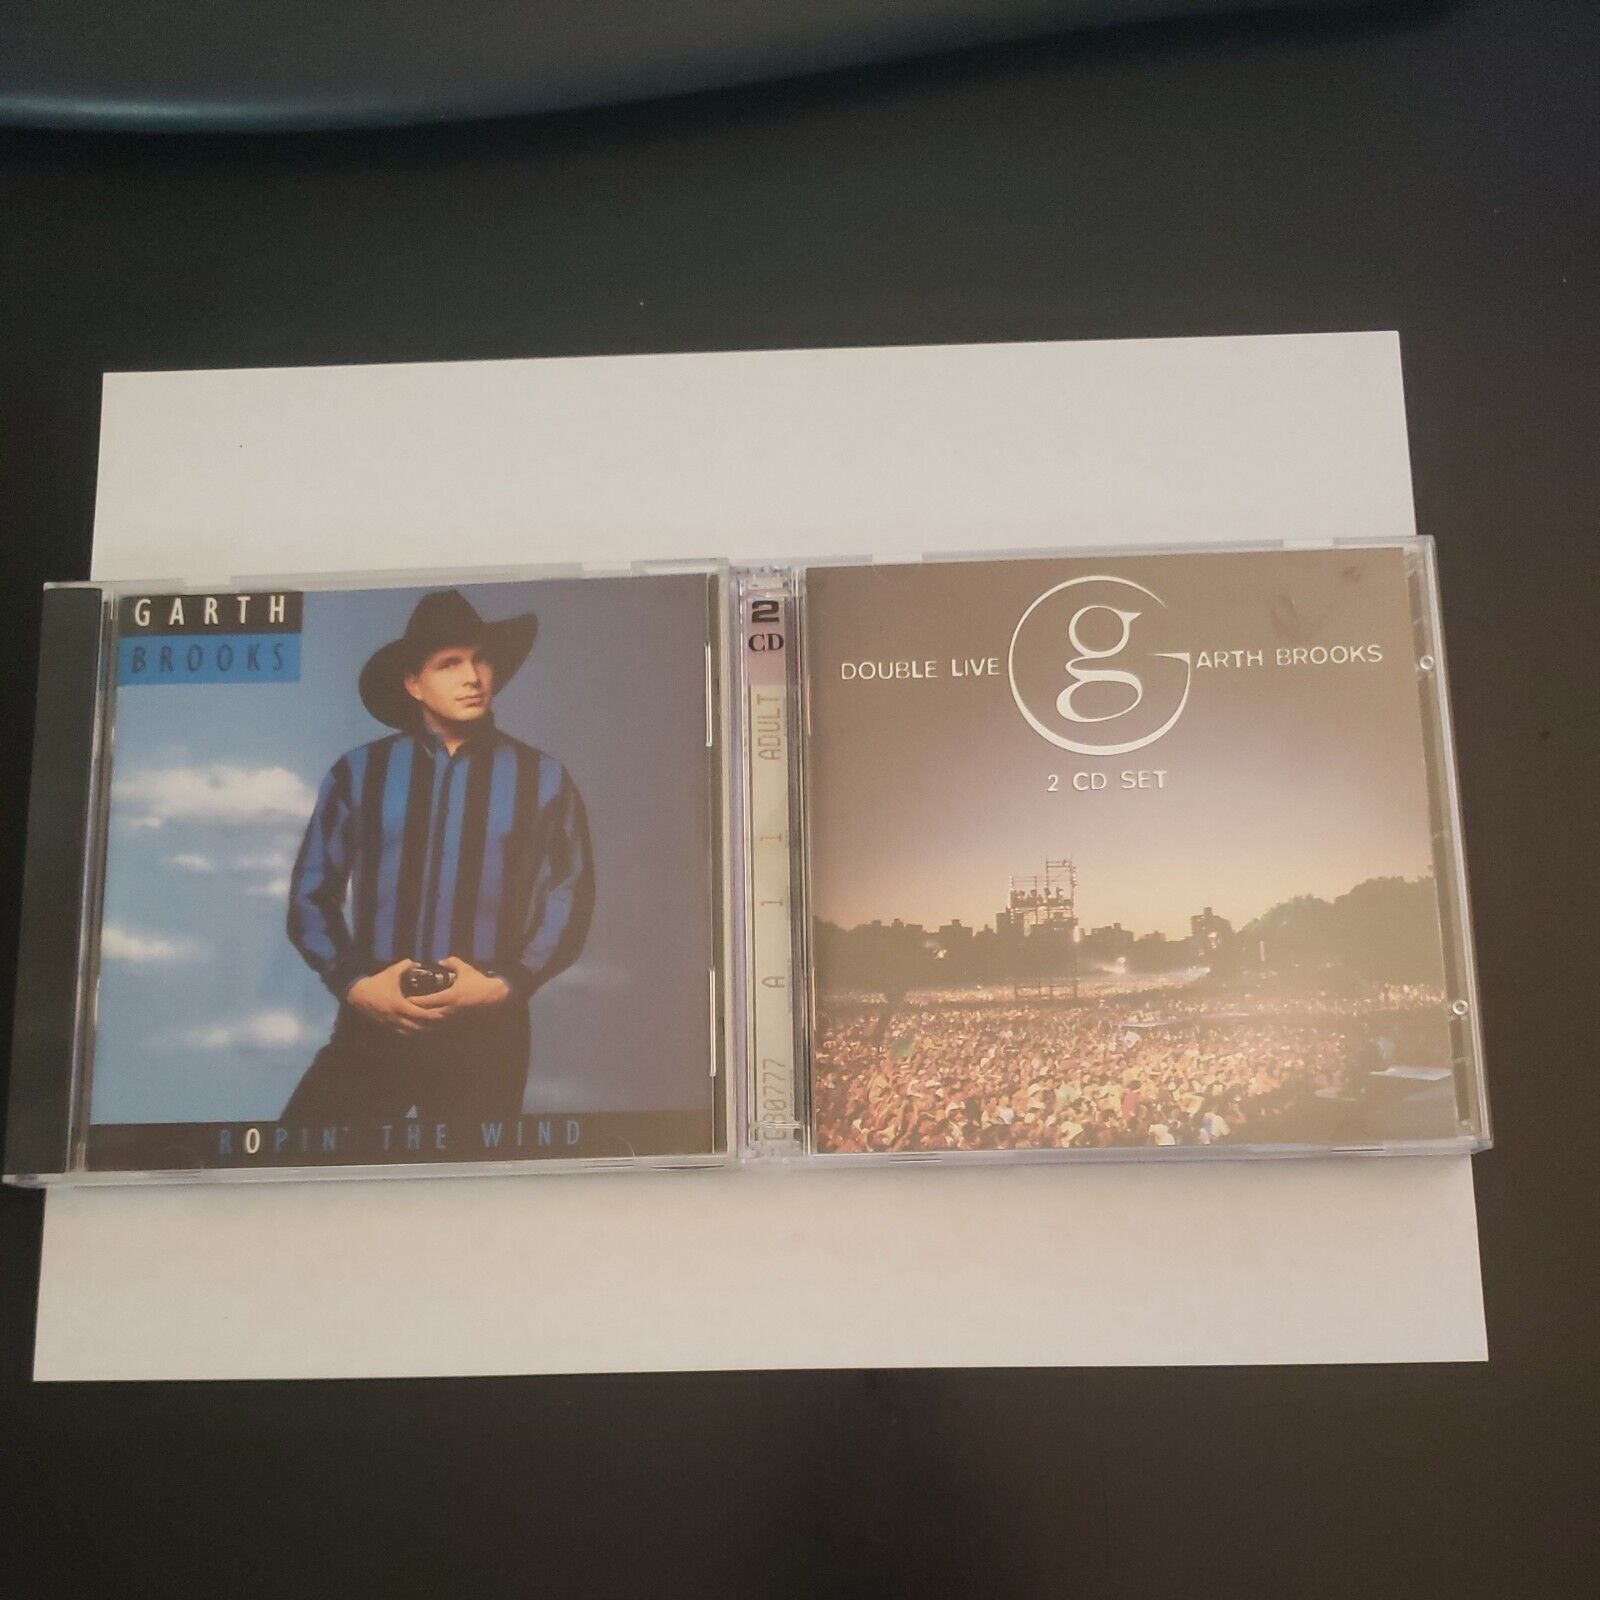 Lot of 2 - Double Live by Garth Brooks and Ropin The Wind (CD)